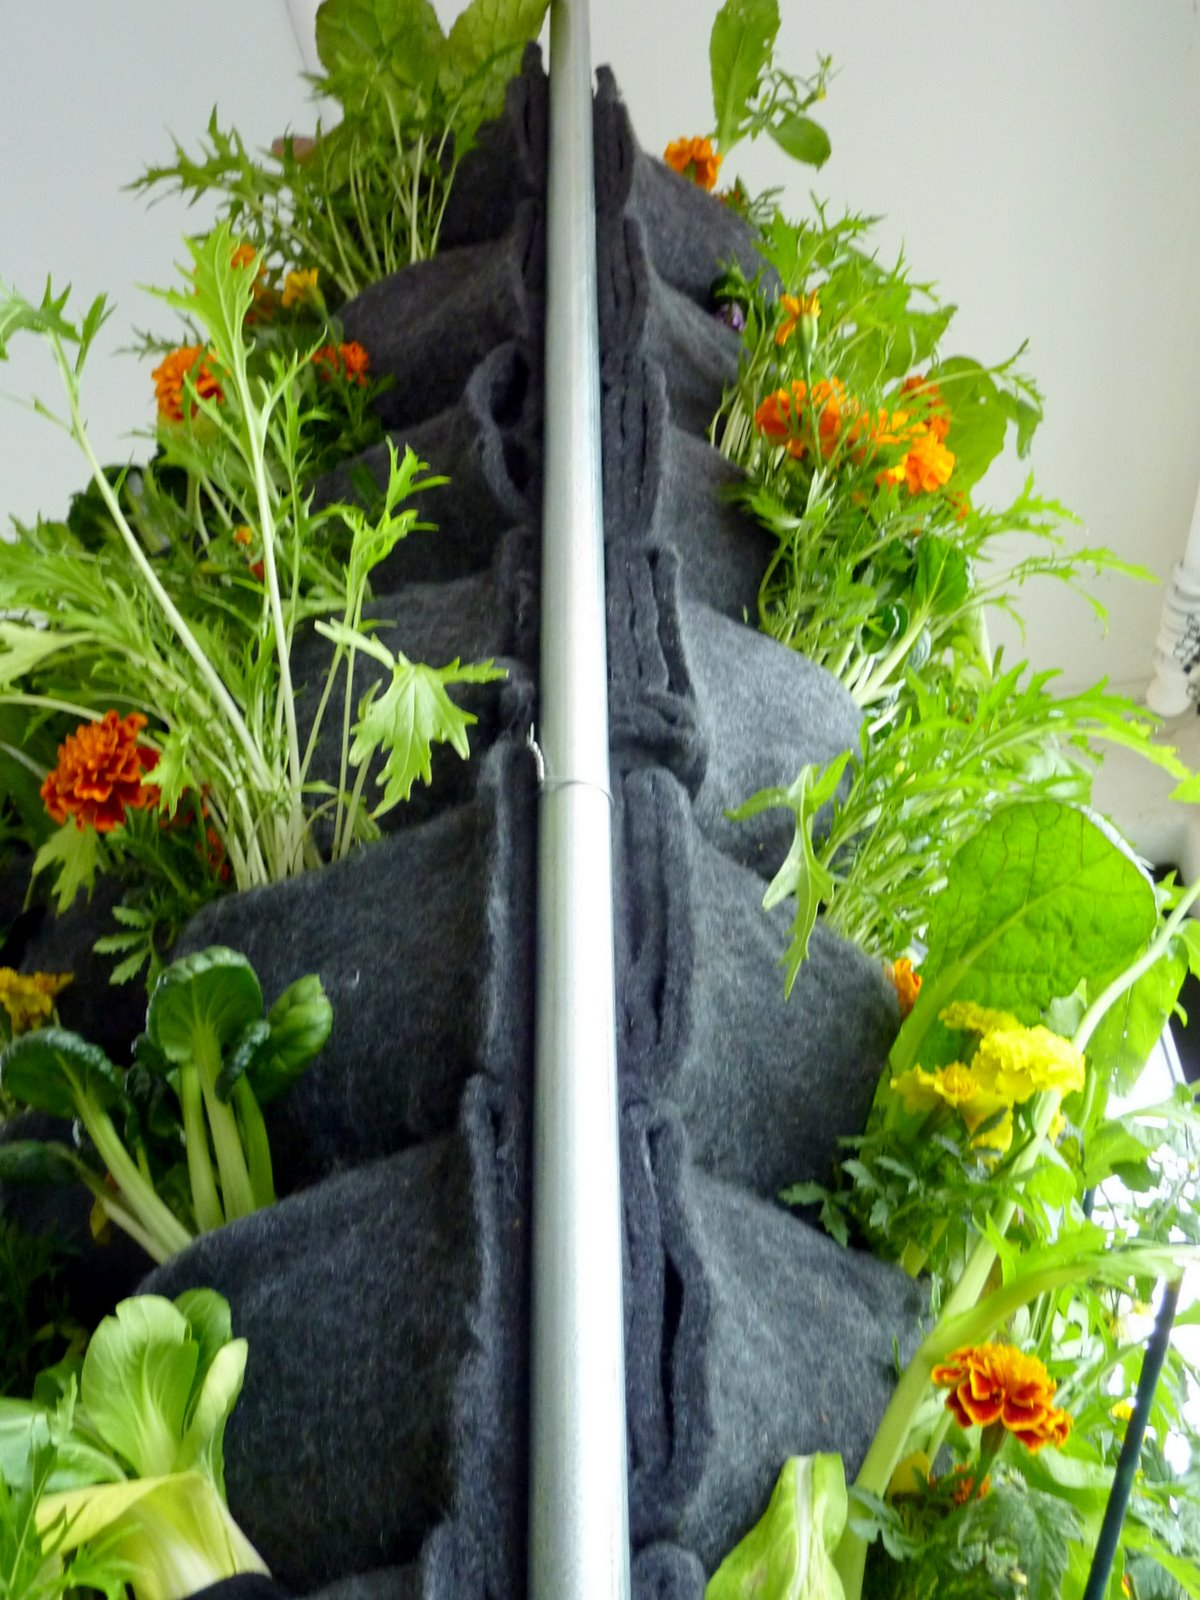 ... Vegetable Farming While Employing Aquaponic Directory For Gardening